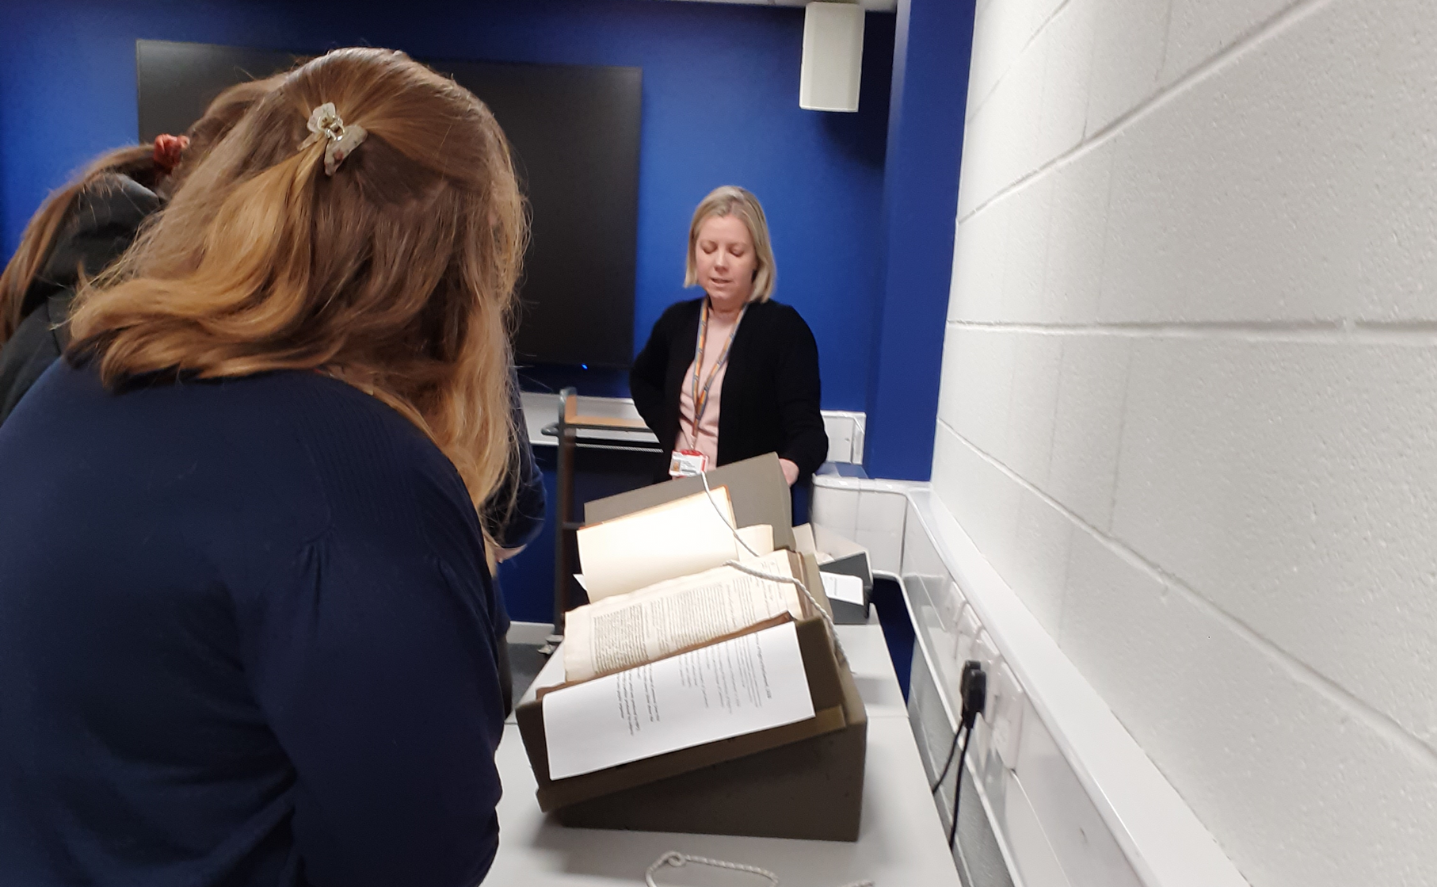 A student looking at archival materials